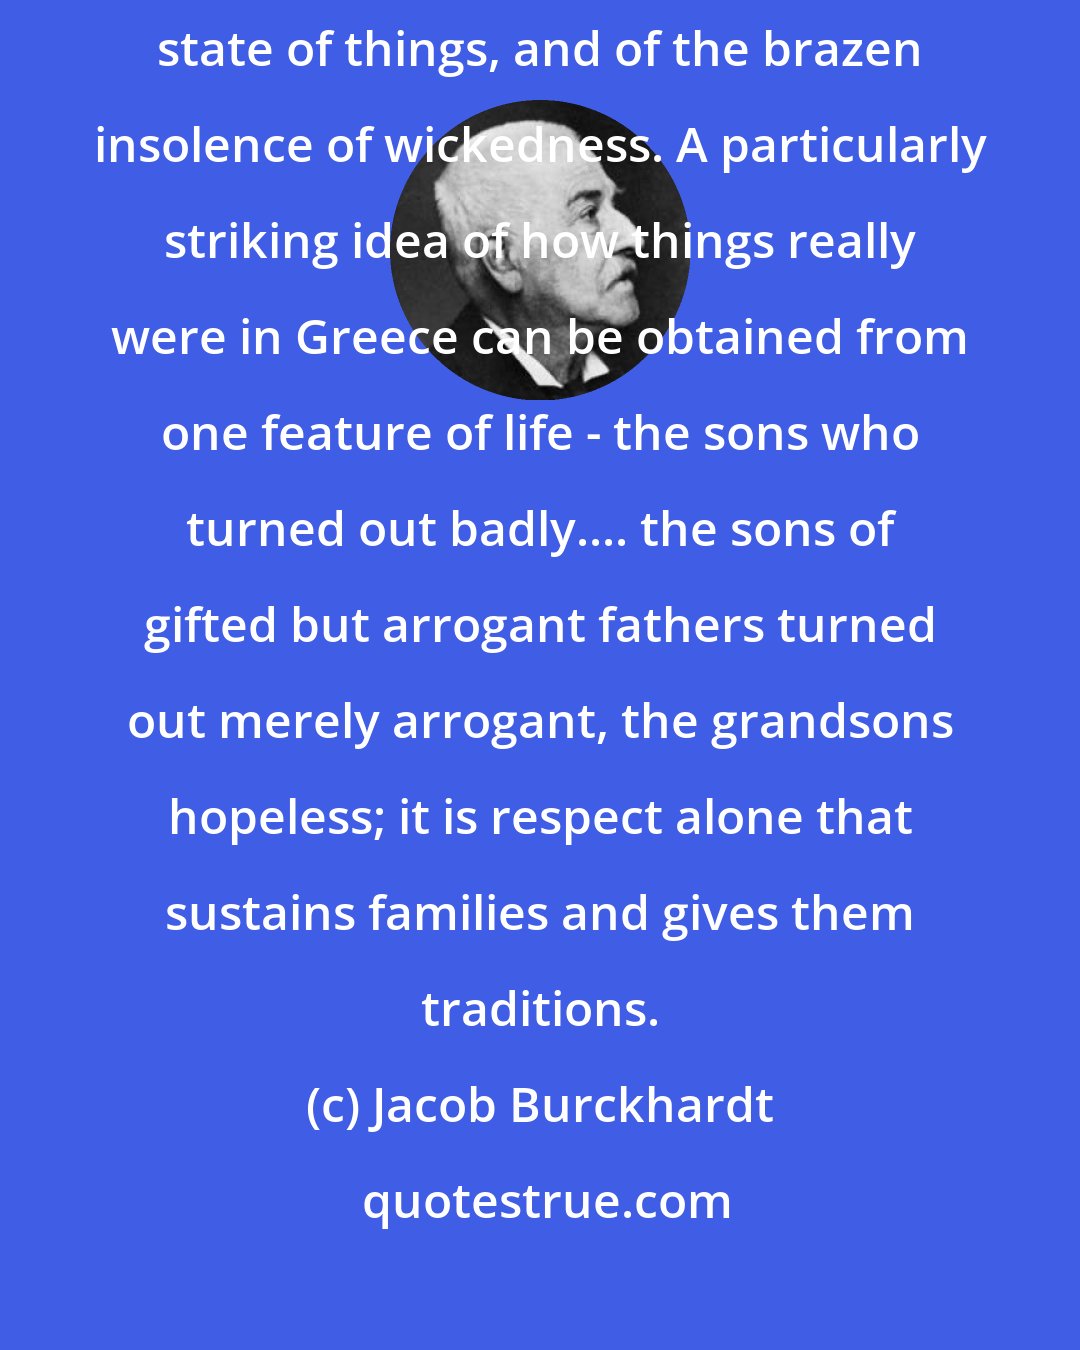 Jacob Burckhardt: The whole life of Demosthenes... leaves the impression of a melancholy state of things, and of the brazen insolence of wickedness. A particularly striking idea of how things really were in Greece can be obtained from one feature of life - the sons who turned out badly.... the sons of gifted but arrogant fathers turned out merely arrogant, the grandsons hopeless; it is respect alone that sustains families and gives them traditions.